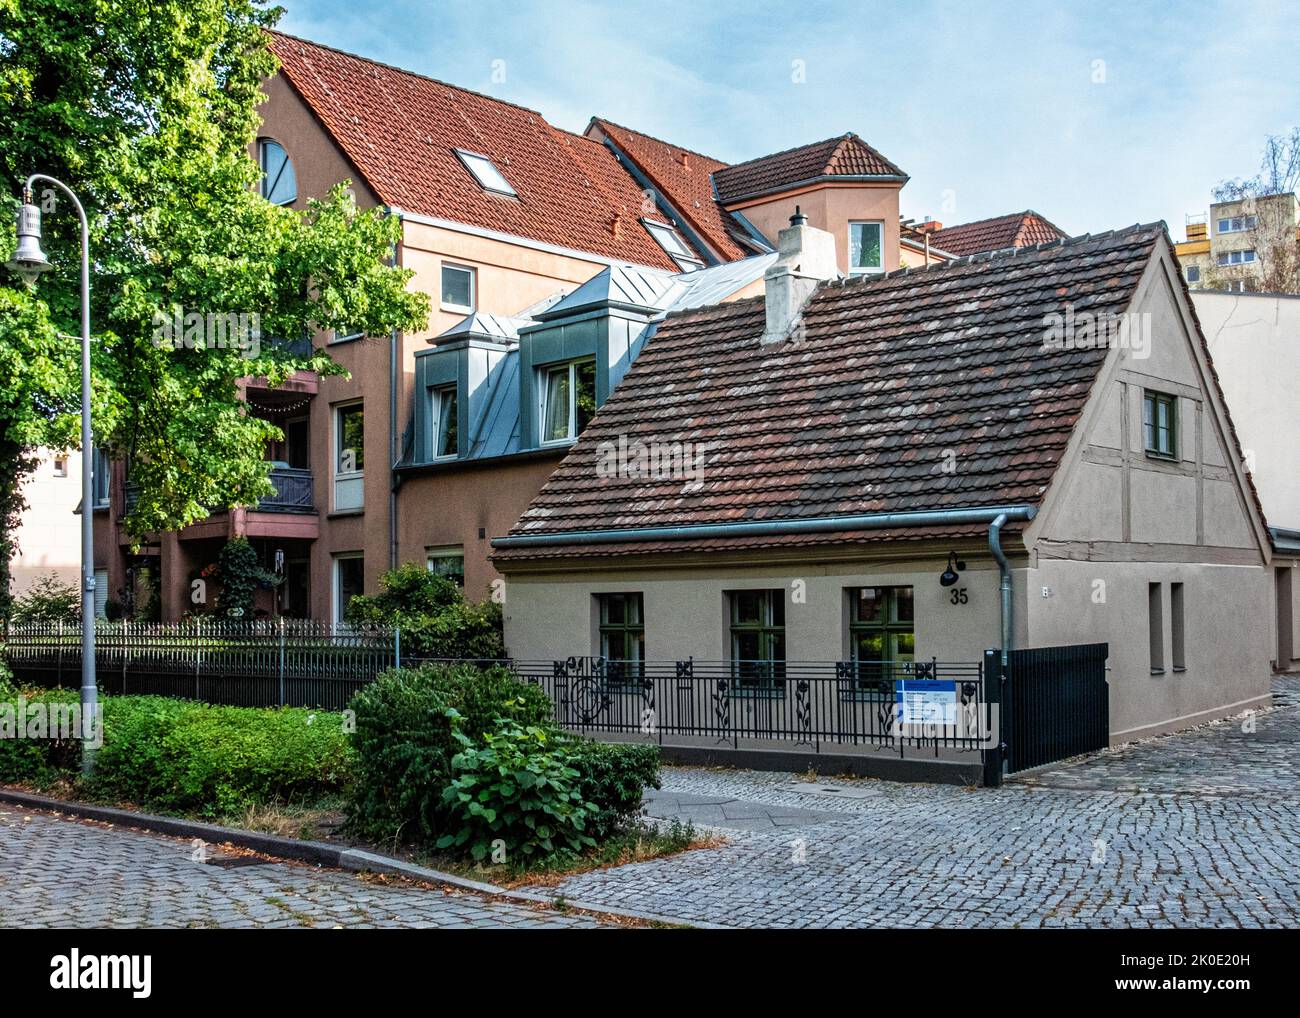 Historic old listed Buildings, Alt Reinickendorf, Berlin, Germany Stock Photo